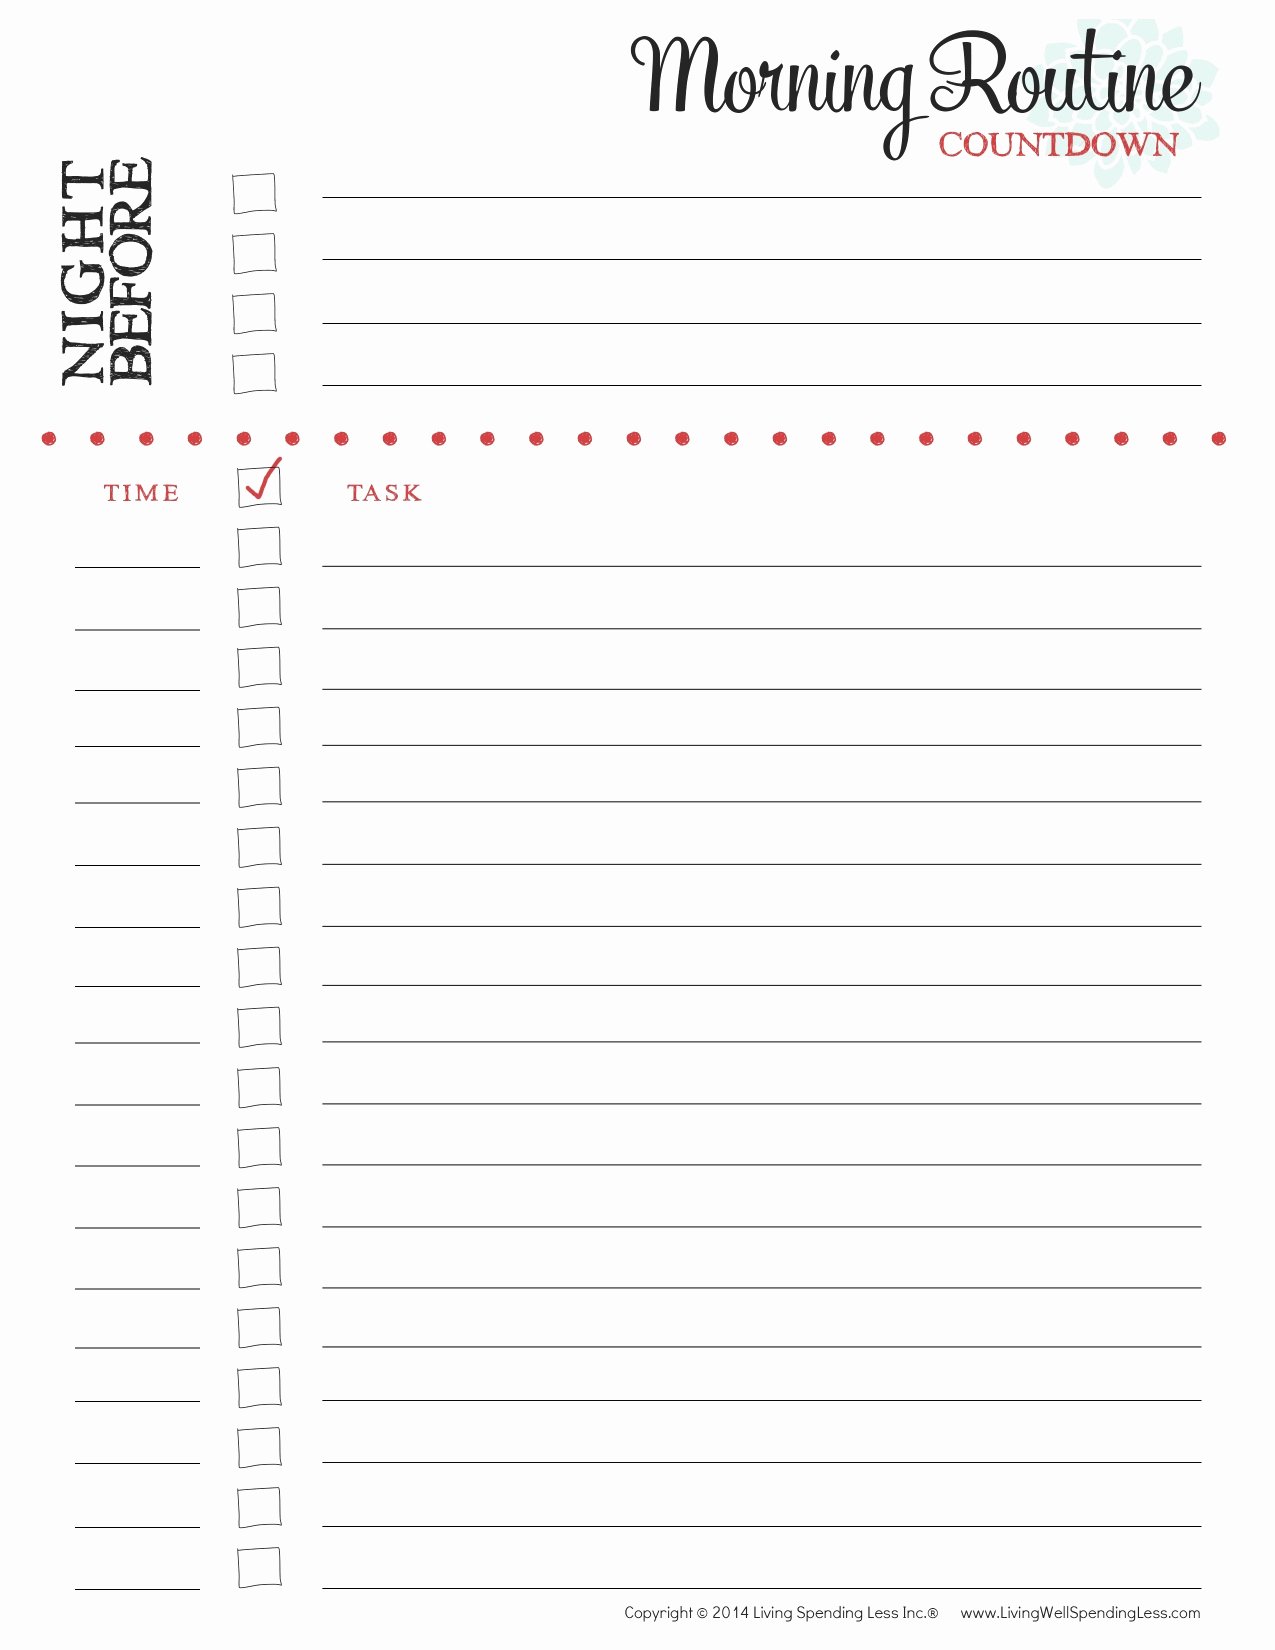 Morning Routine Checklist Template Awesome Create Morning Routine that Works for You